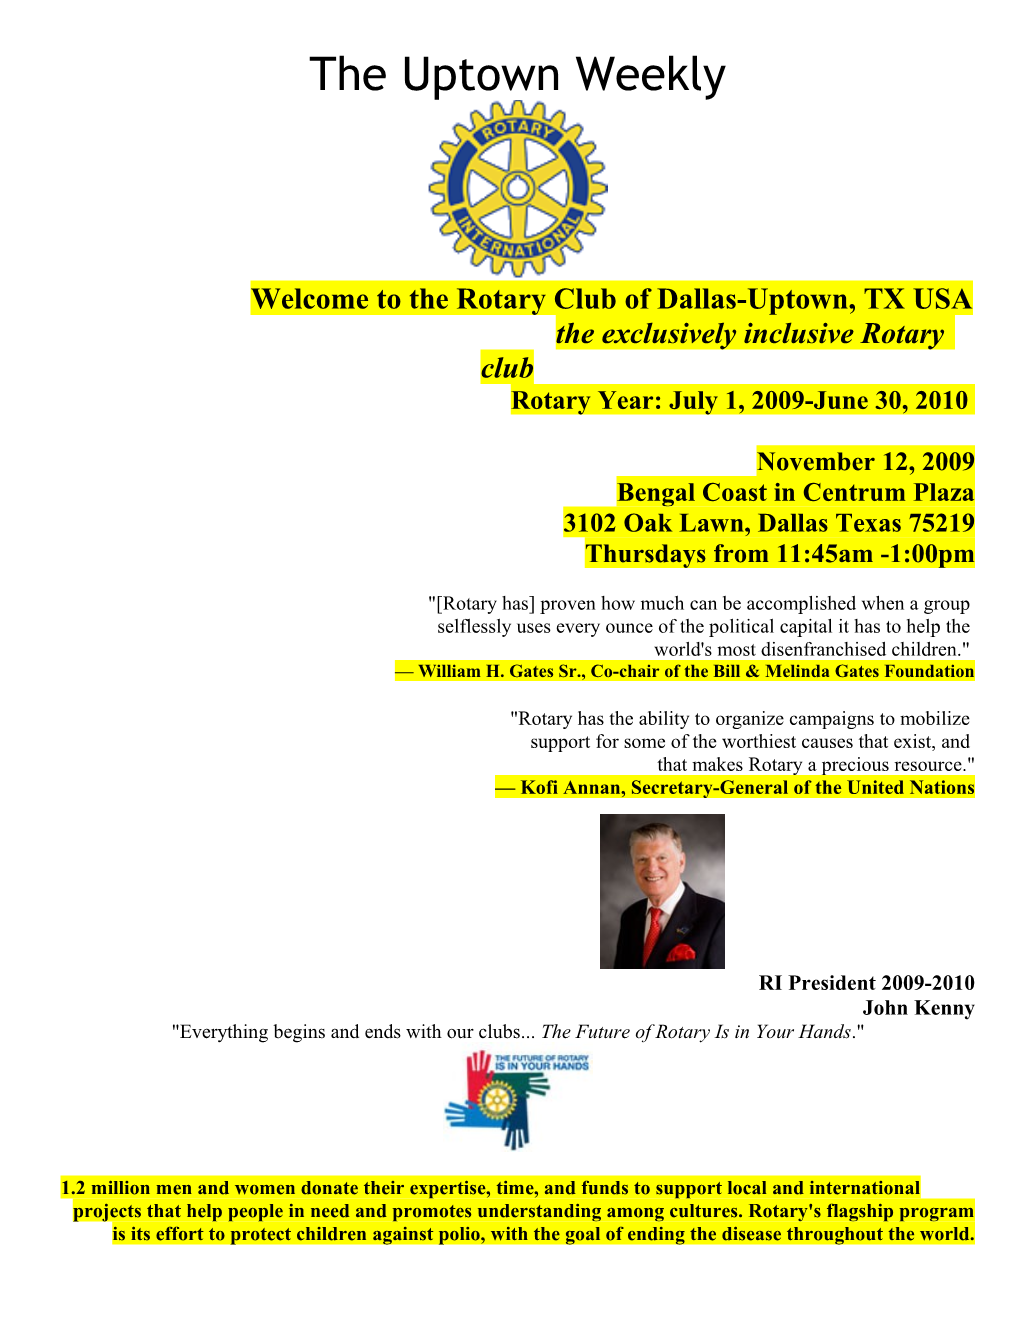 Welcome to the Rotary Club of Dallas-Uptown, TX USA